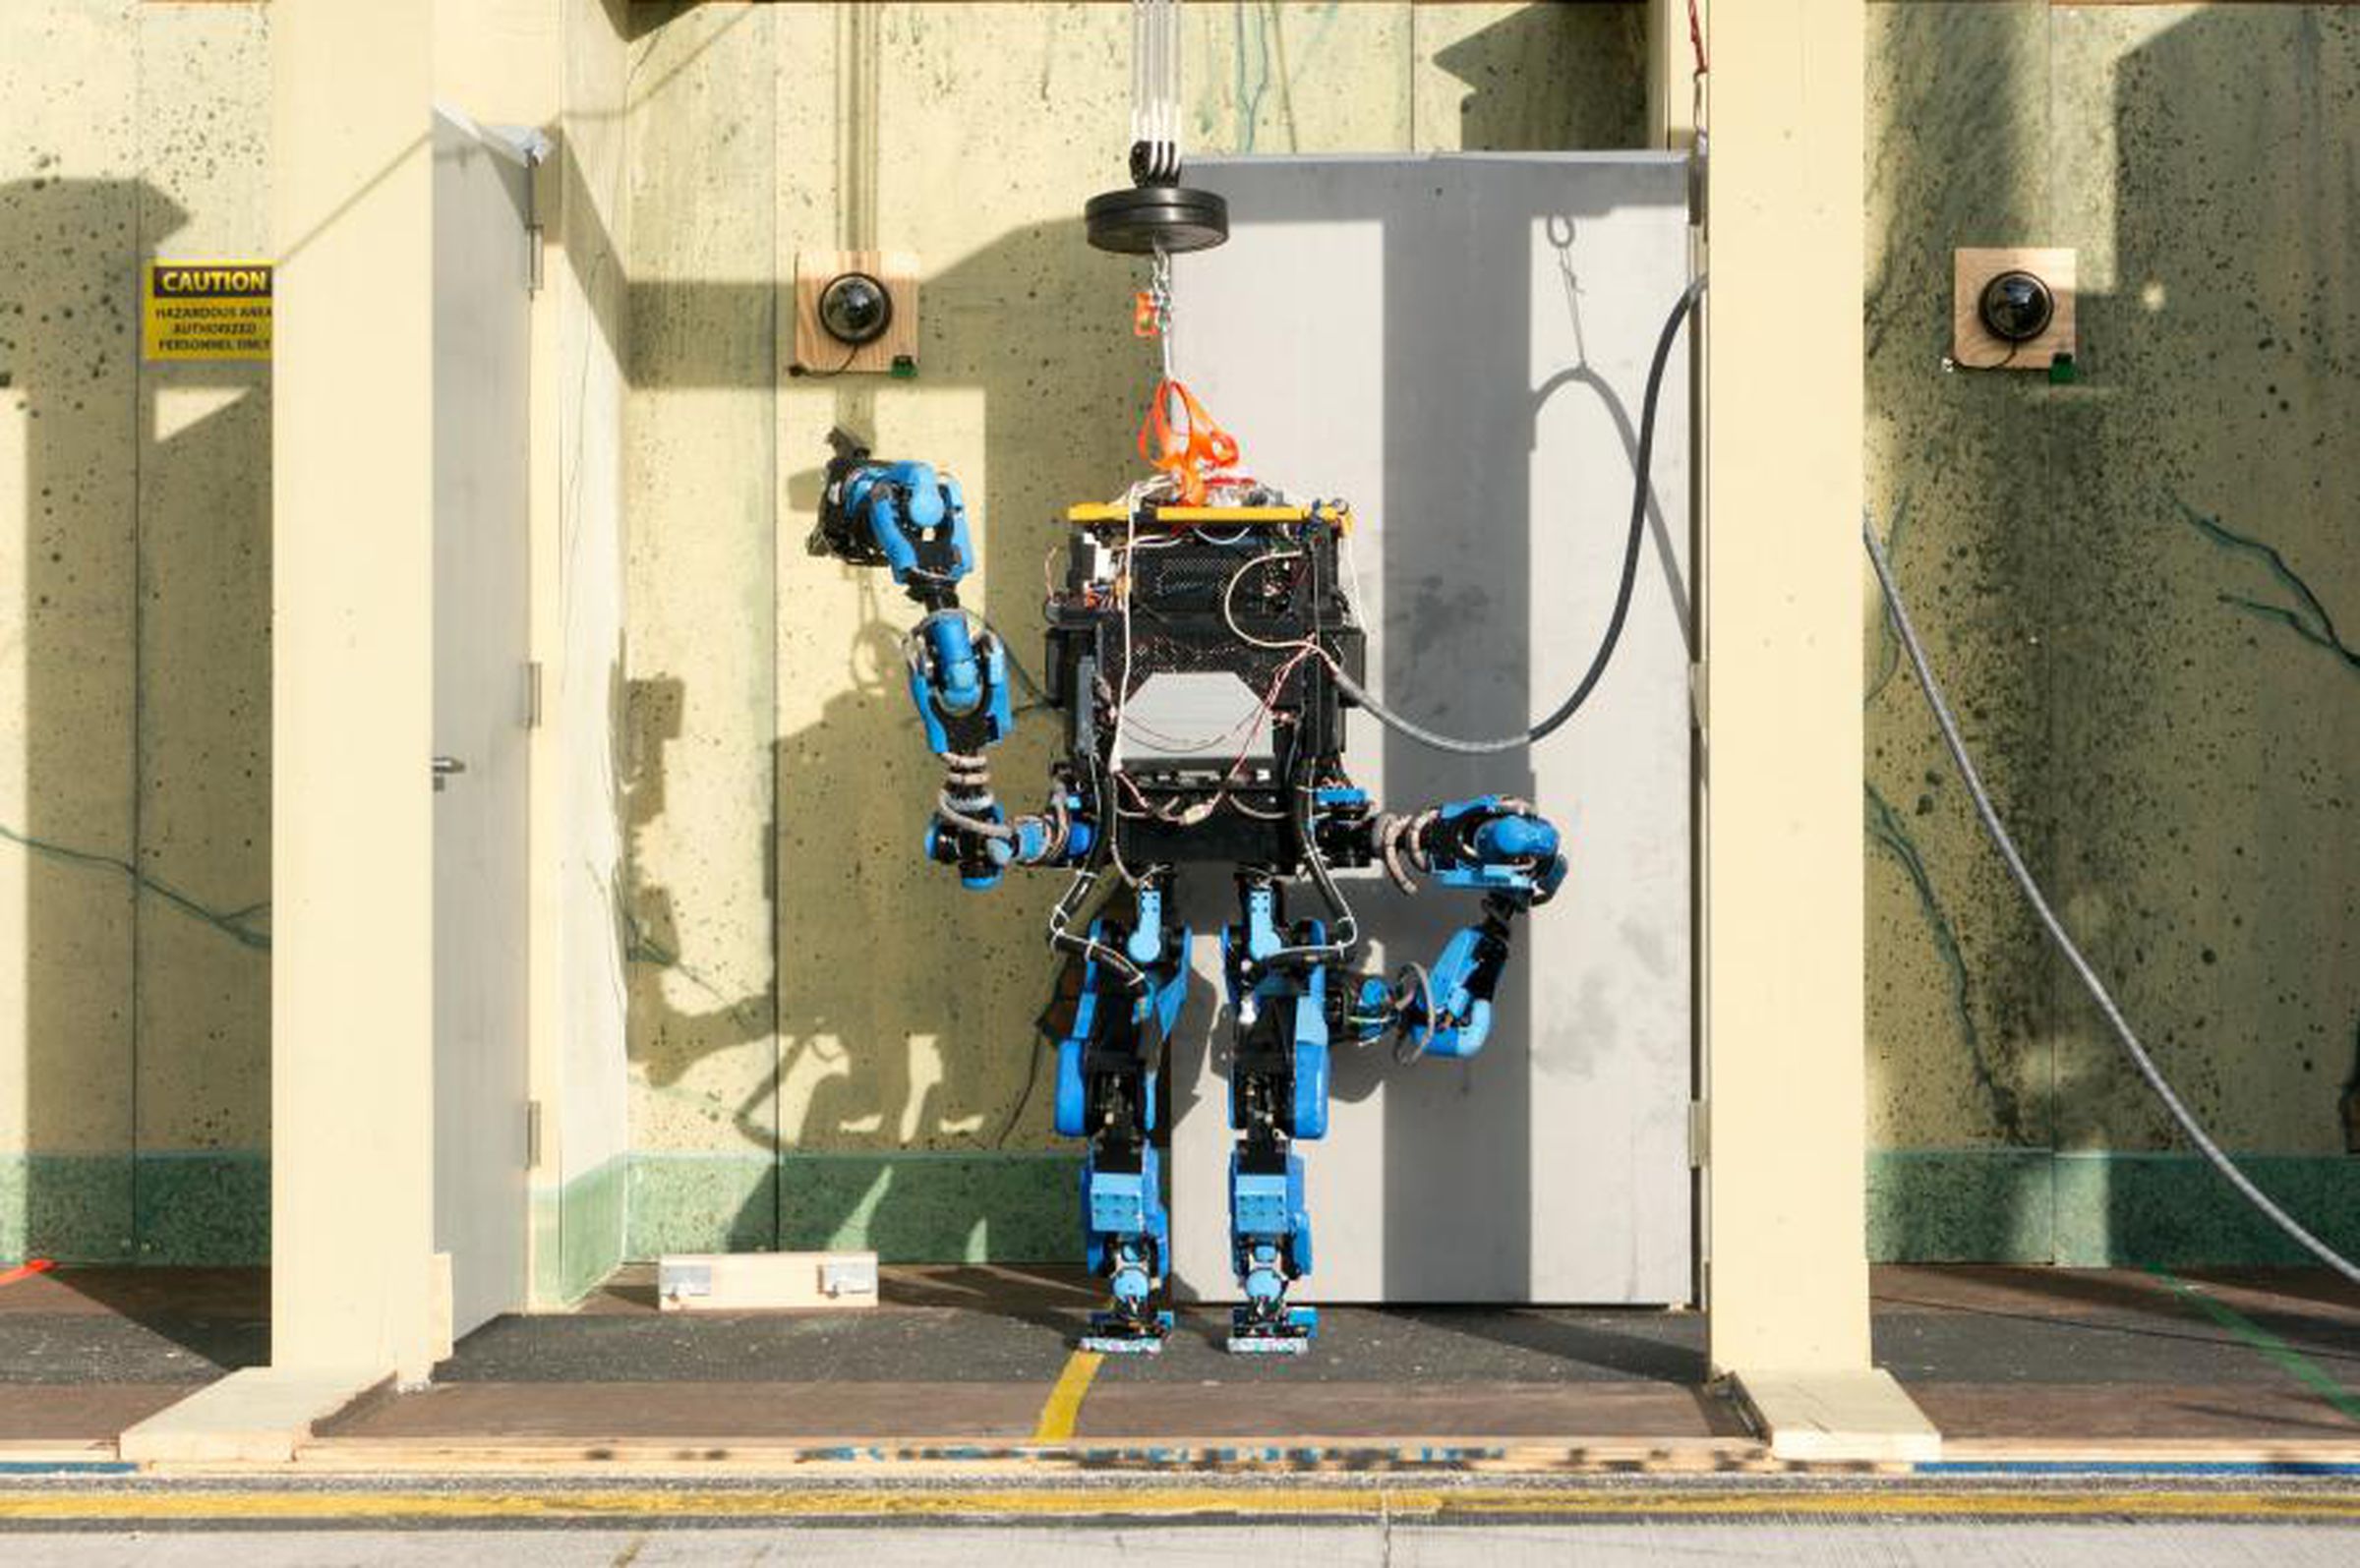 The robotics companies Google bought in 2013 were focused on ambitious legged robots, like the one above designed by Schaft. 